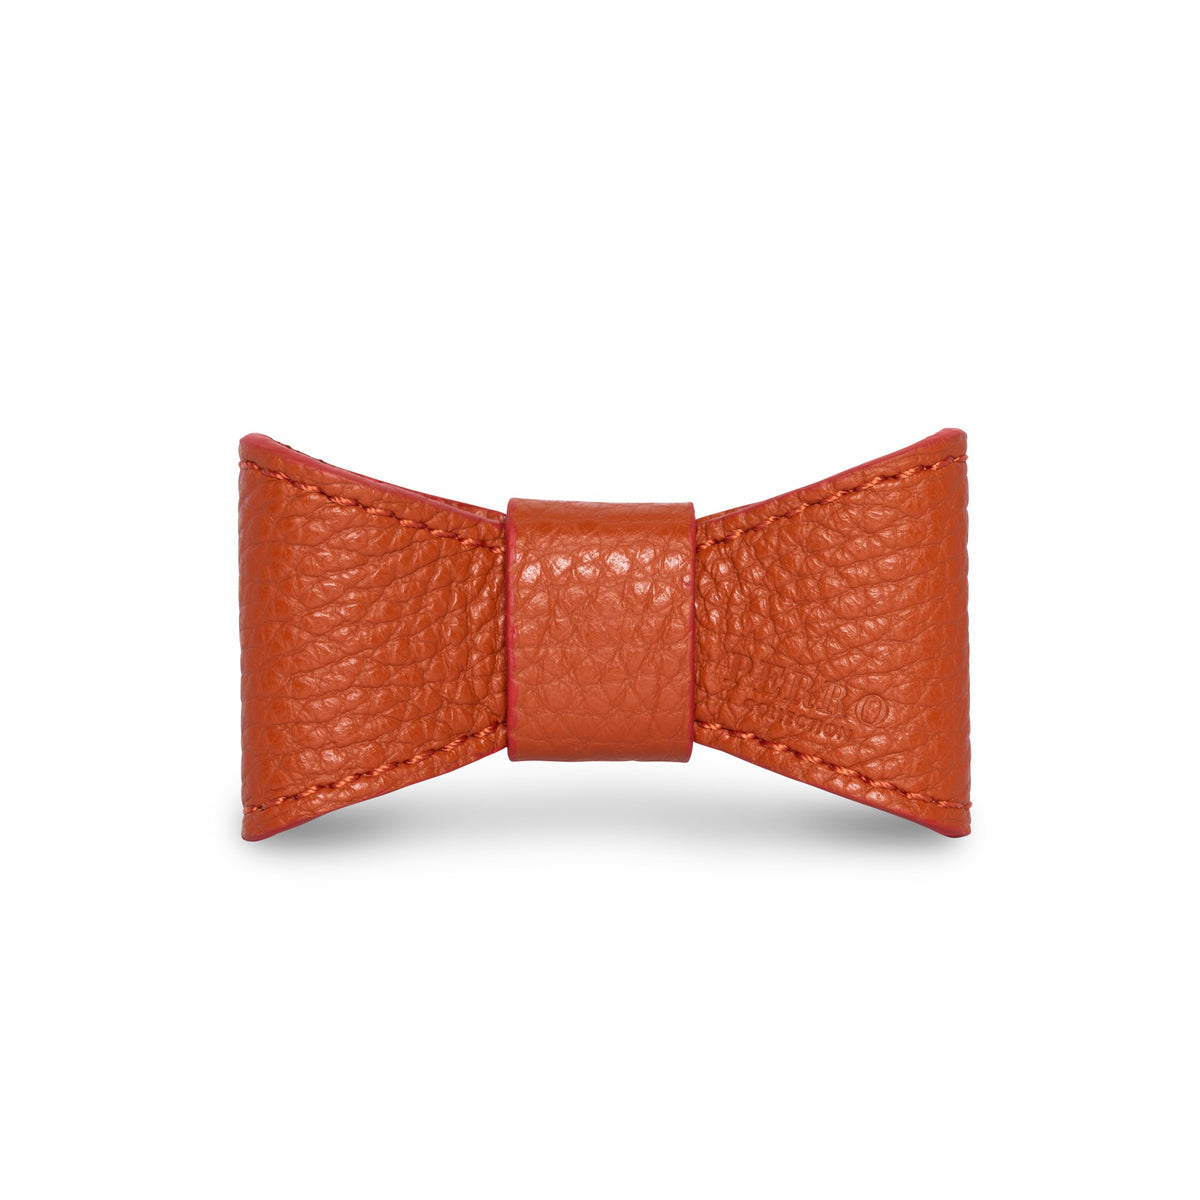 Ginger leather bowtie